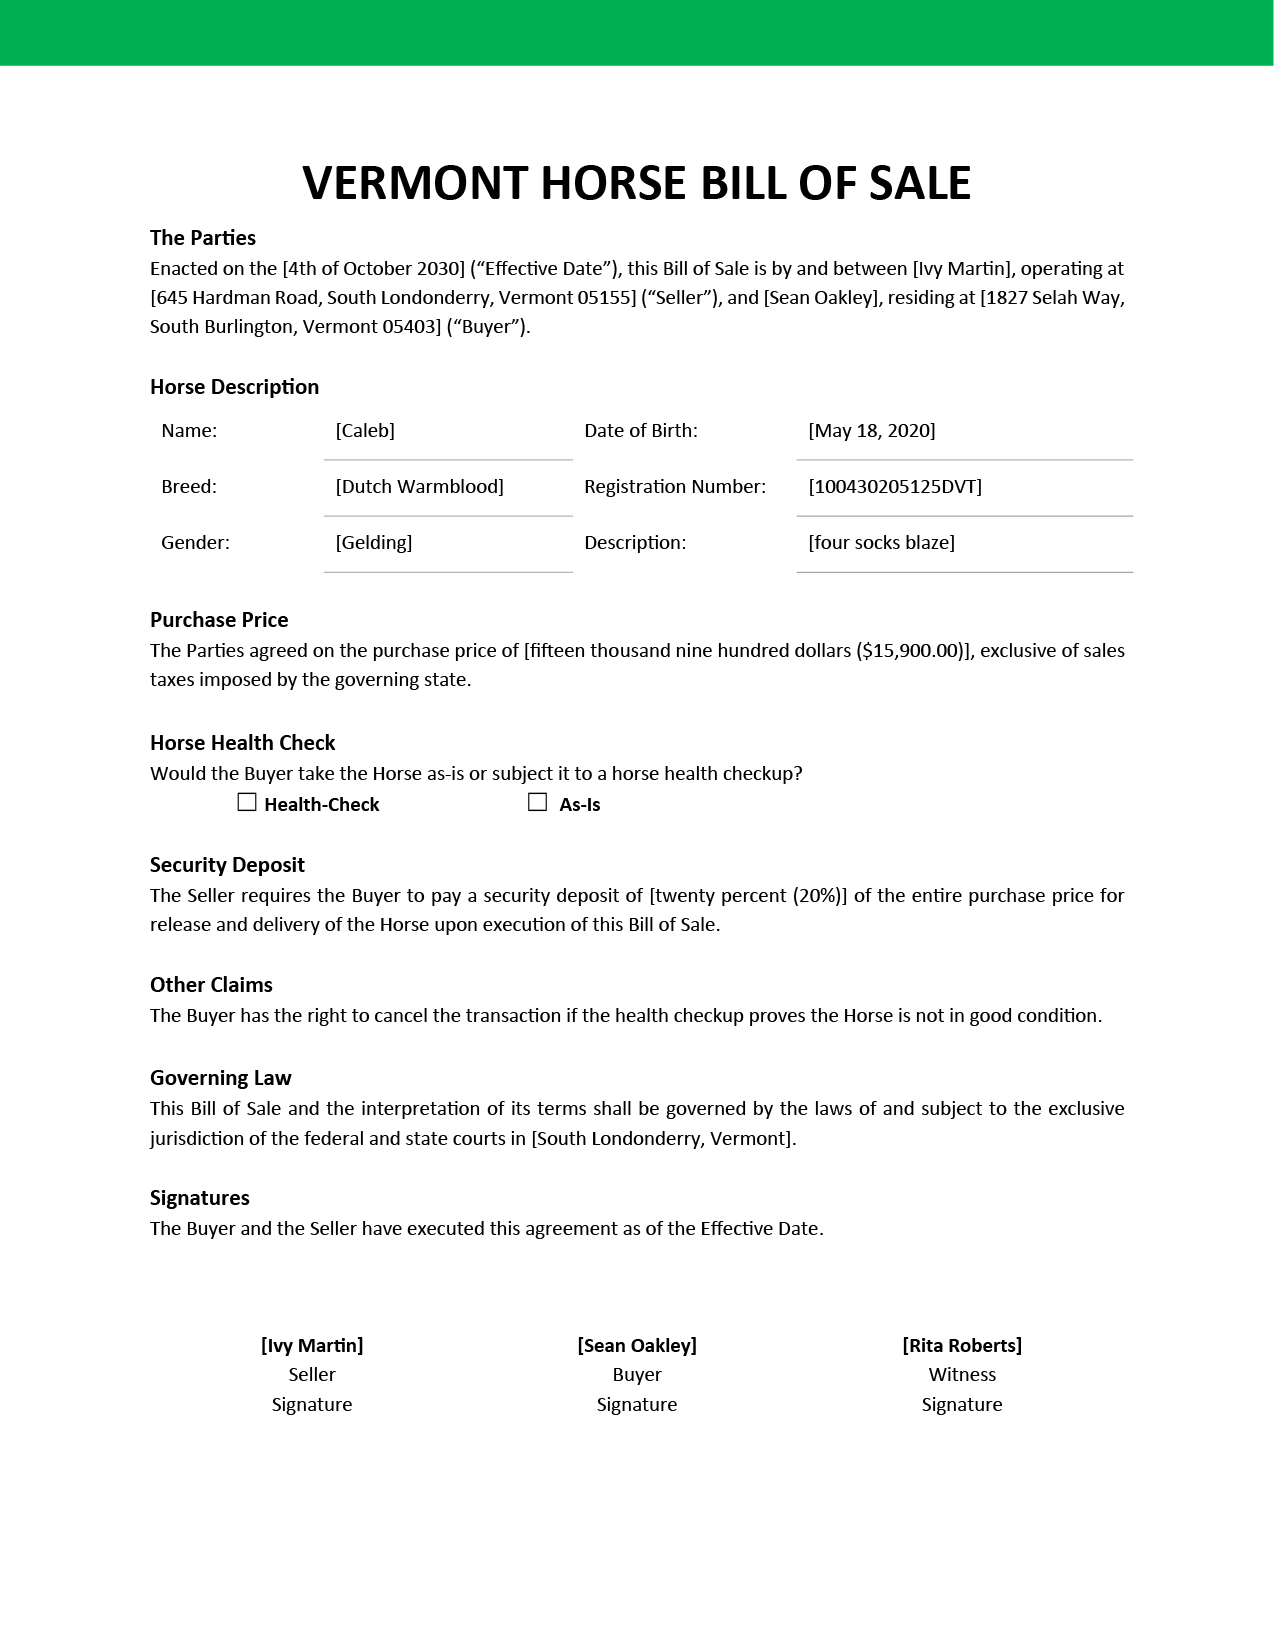 Vermont Horse Bill of Sale Template